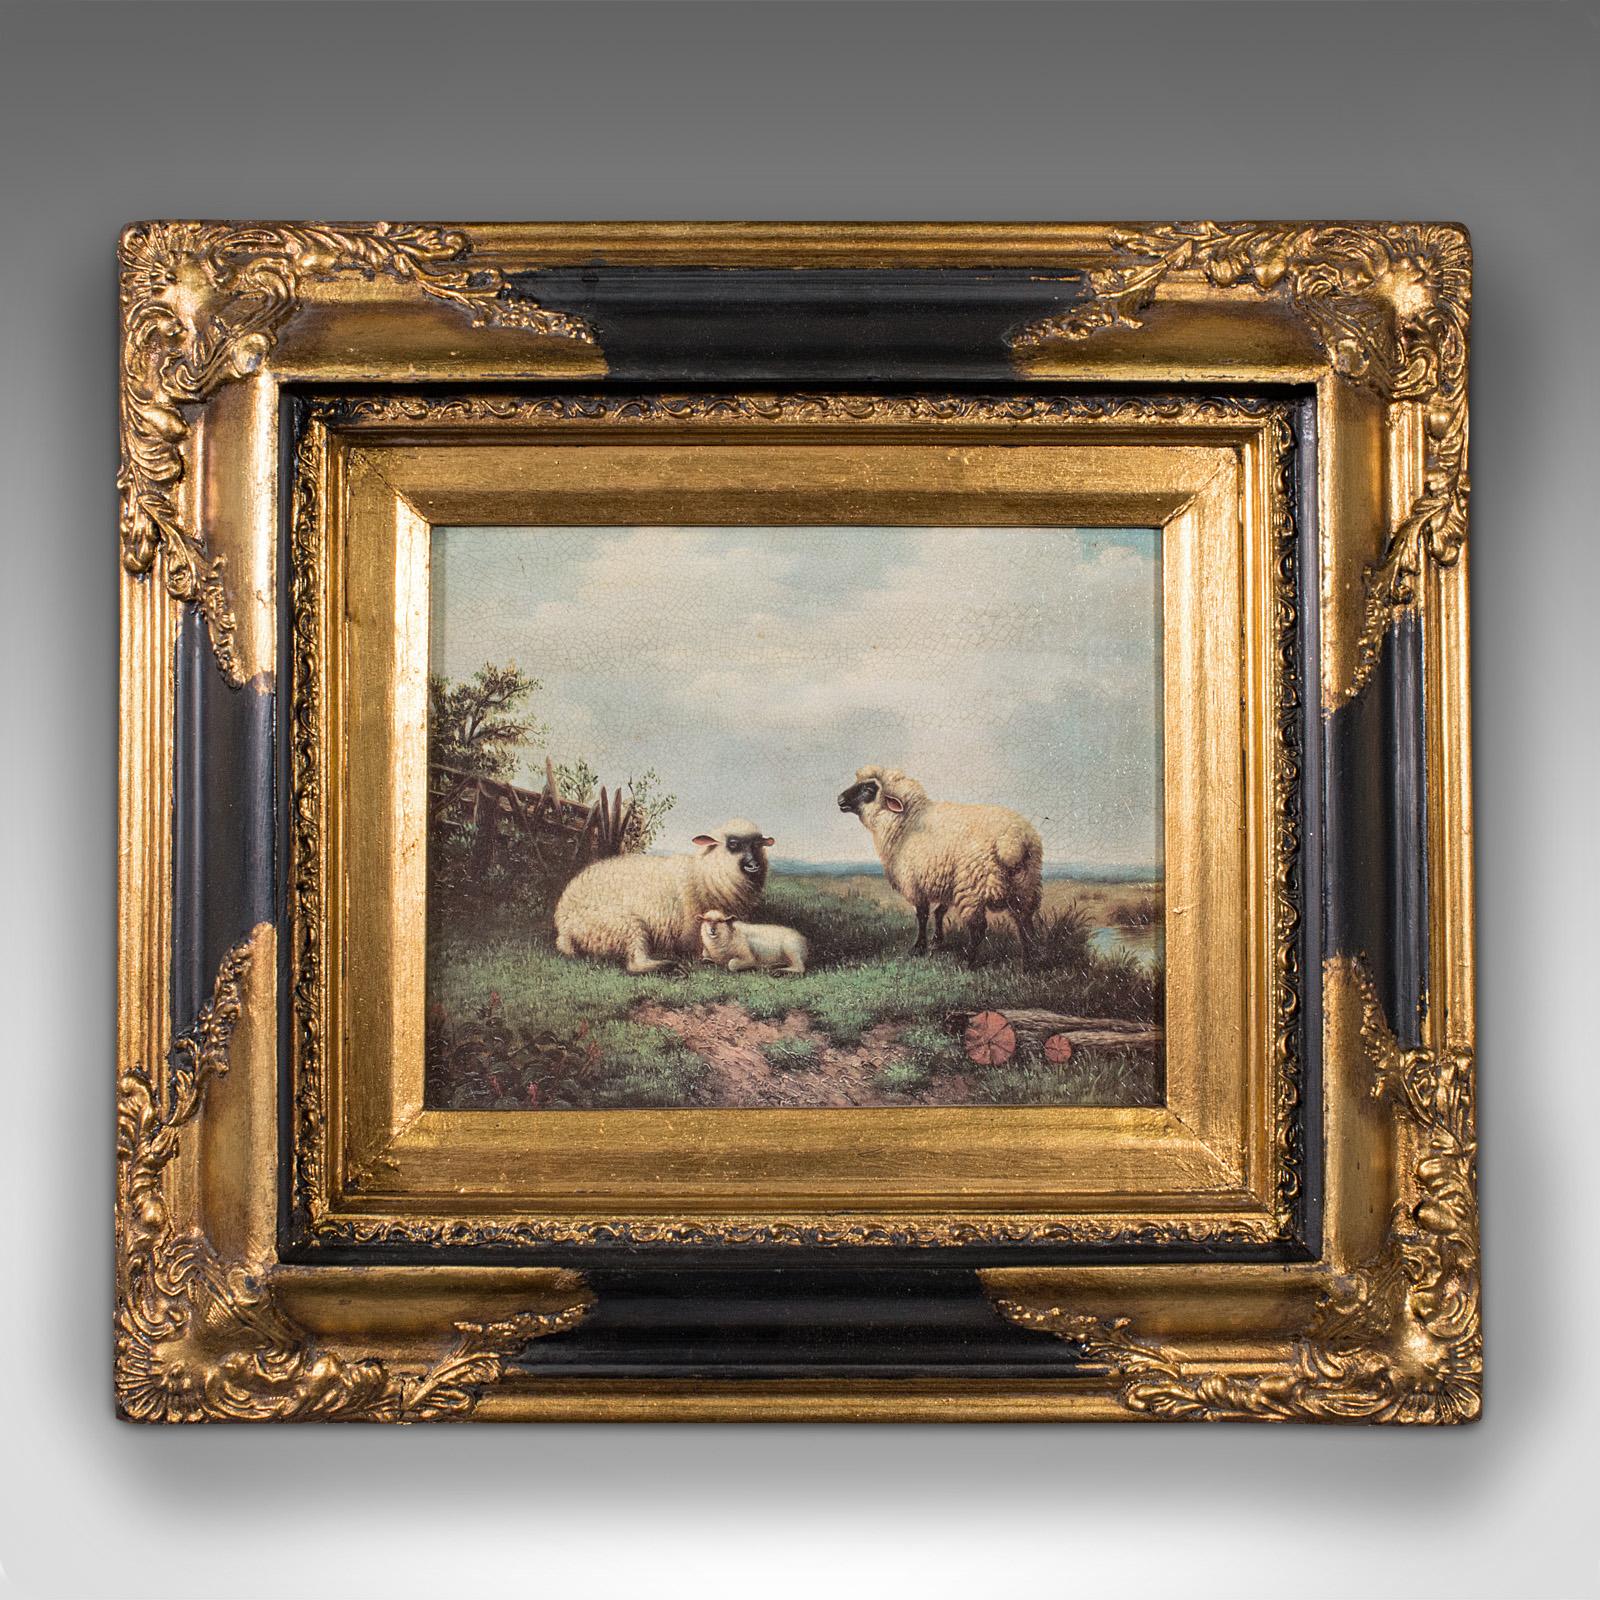 This is a small vintage sheep scene. An English, gilt framed decorative picture with countryside appeal, dating to the late 20th century, circa 1980.

Petite and charming, with rural decorative appeal.
Displays a desirable aged patina and in good